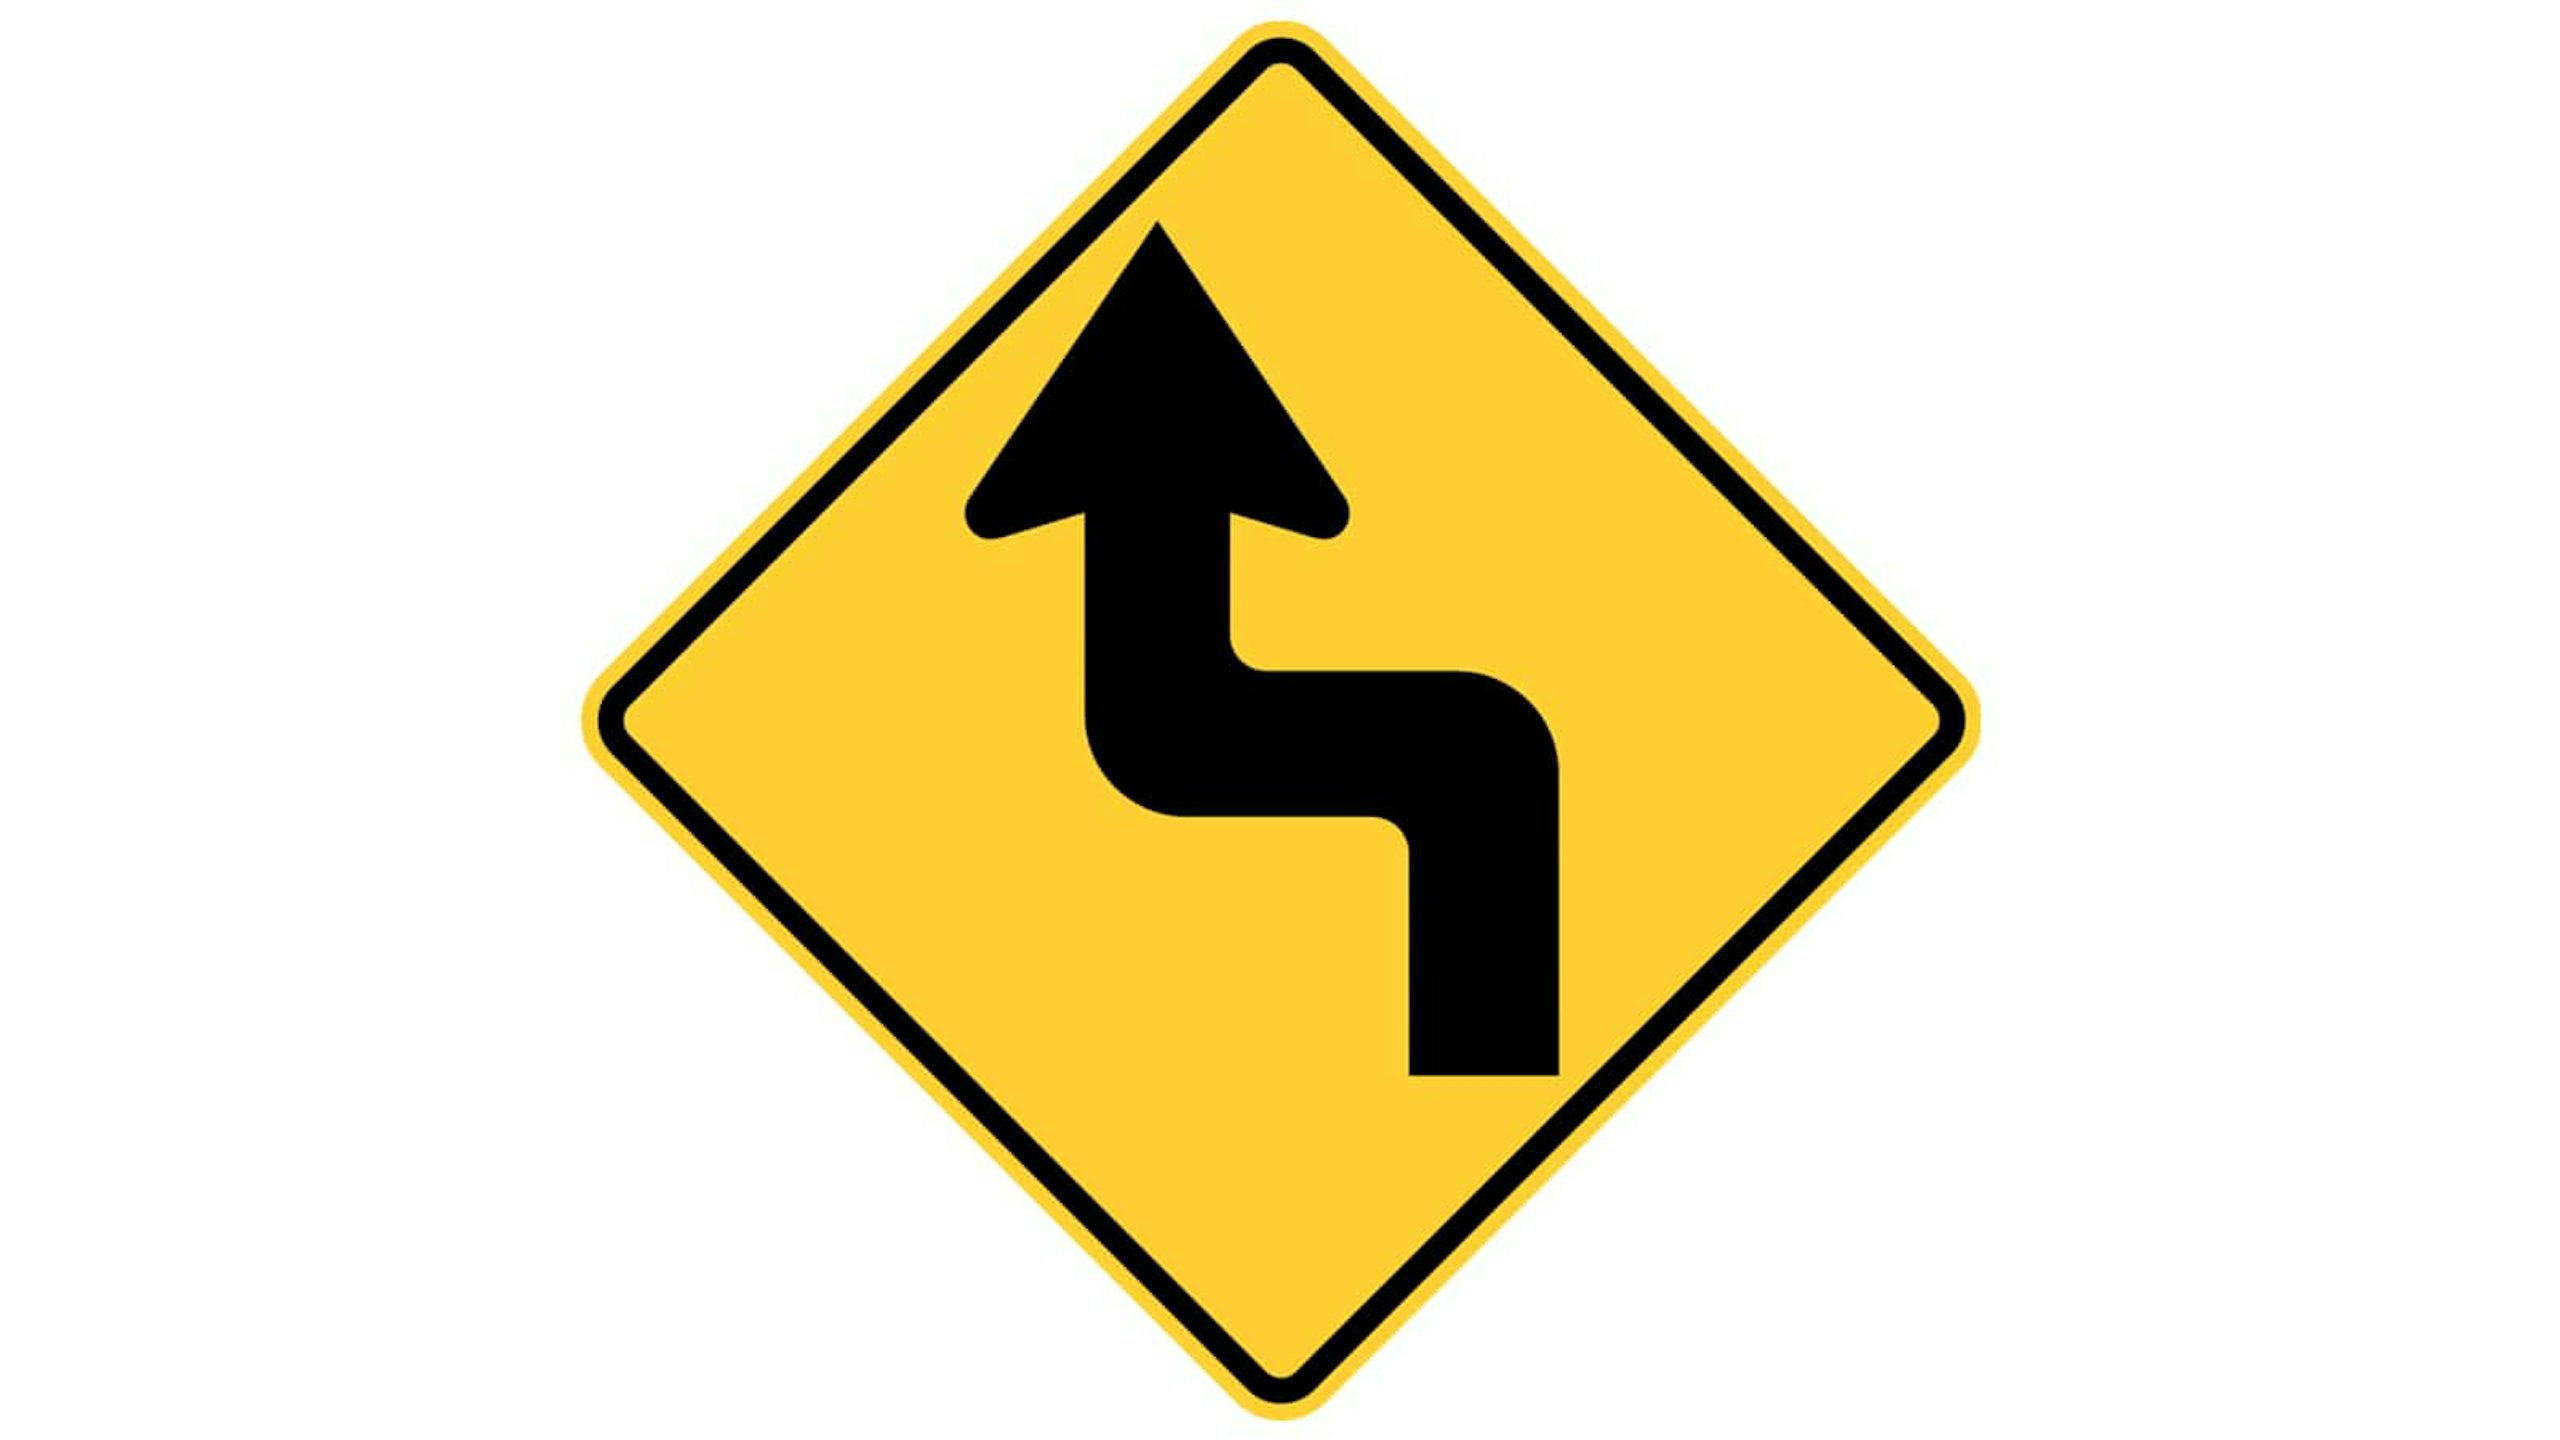 Warning sign reverse turn (first turn to the left)